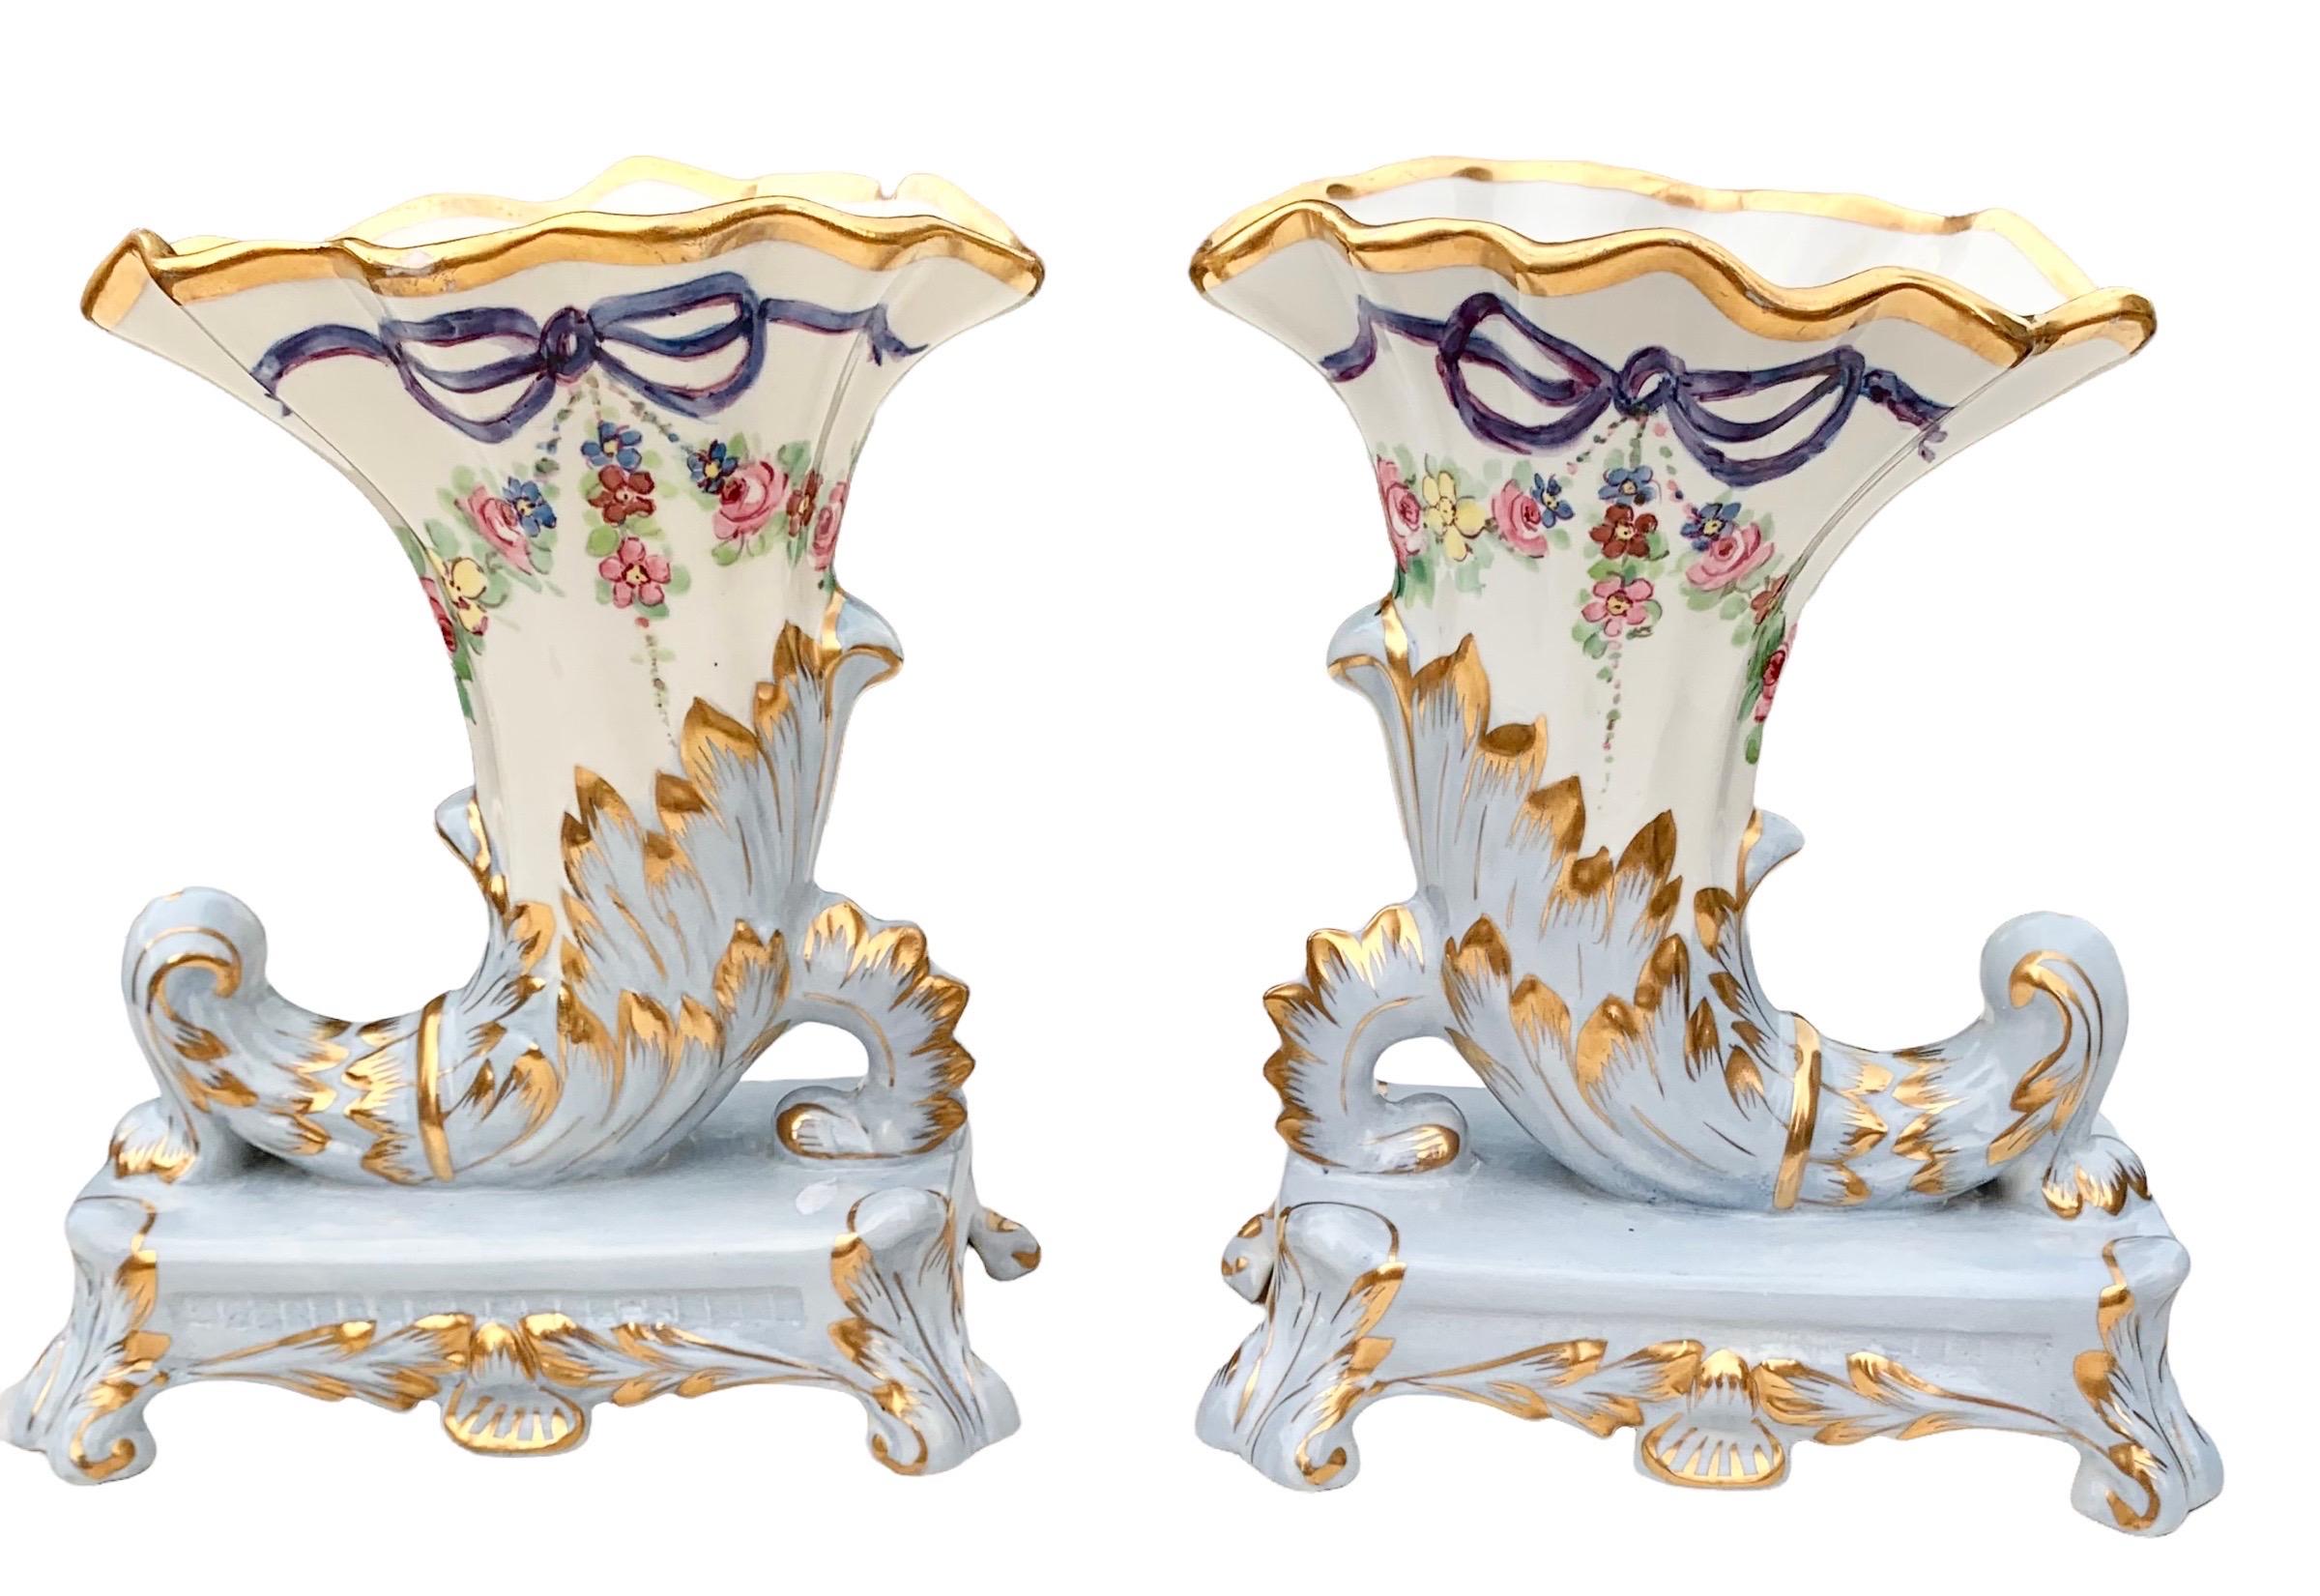 A fine pair of antique French Belle Epoch Limoges porcelain cornucopia vases, C. 1890’s. Created with the most beautiful shades of heavenly blue and gold accents. 

These vases are the finest hand painted porcelain and represent the absolute